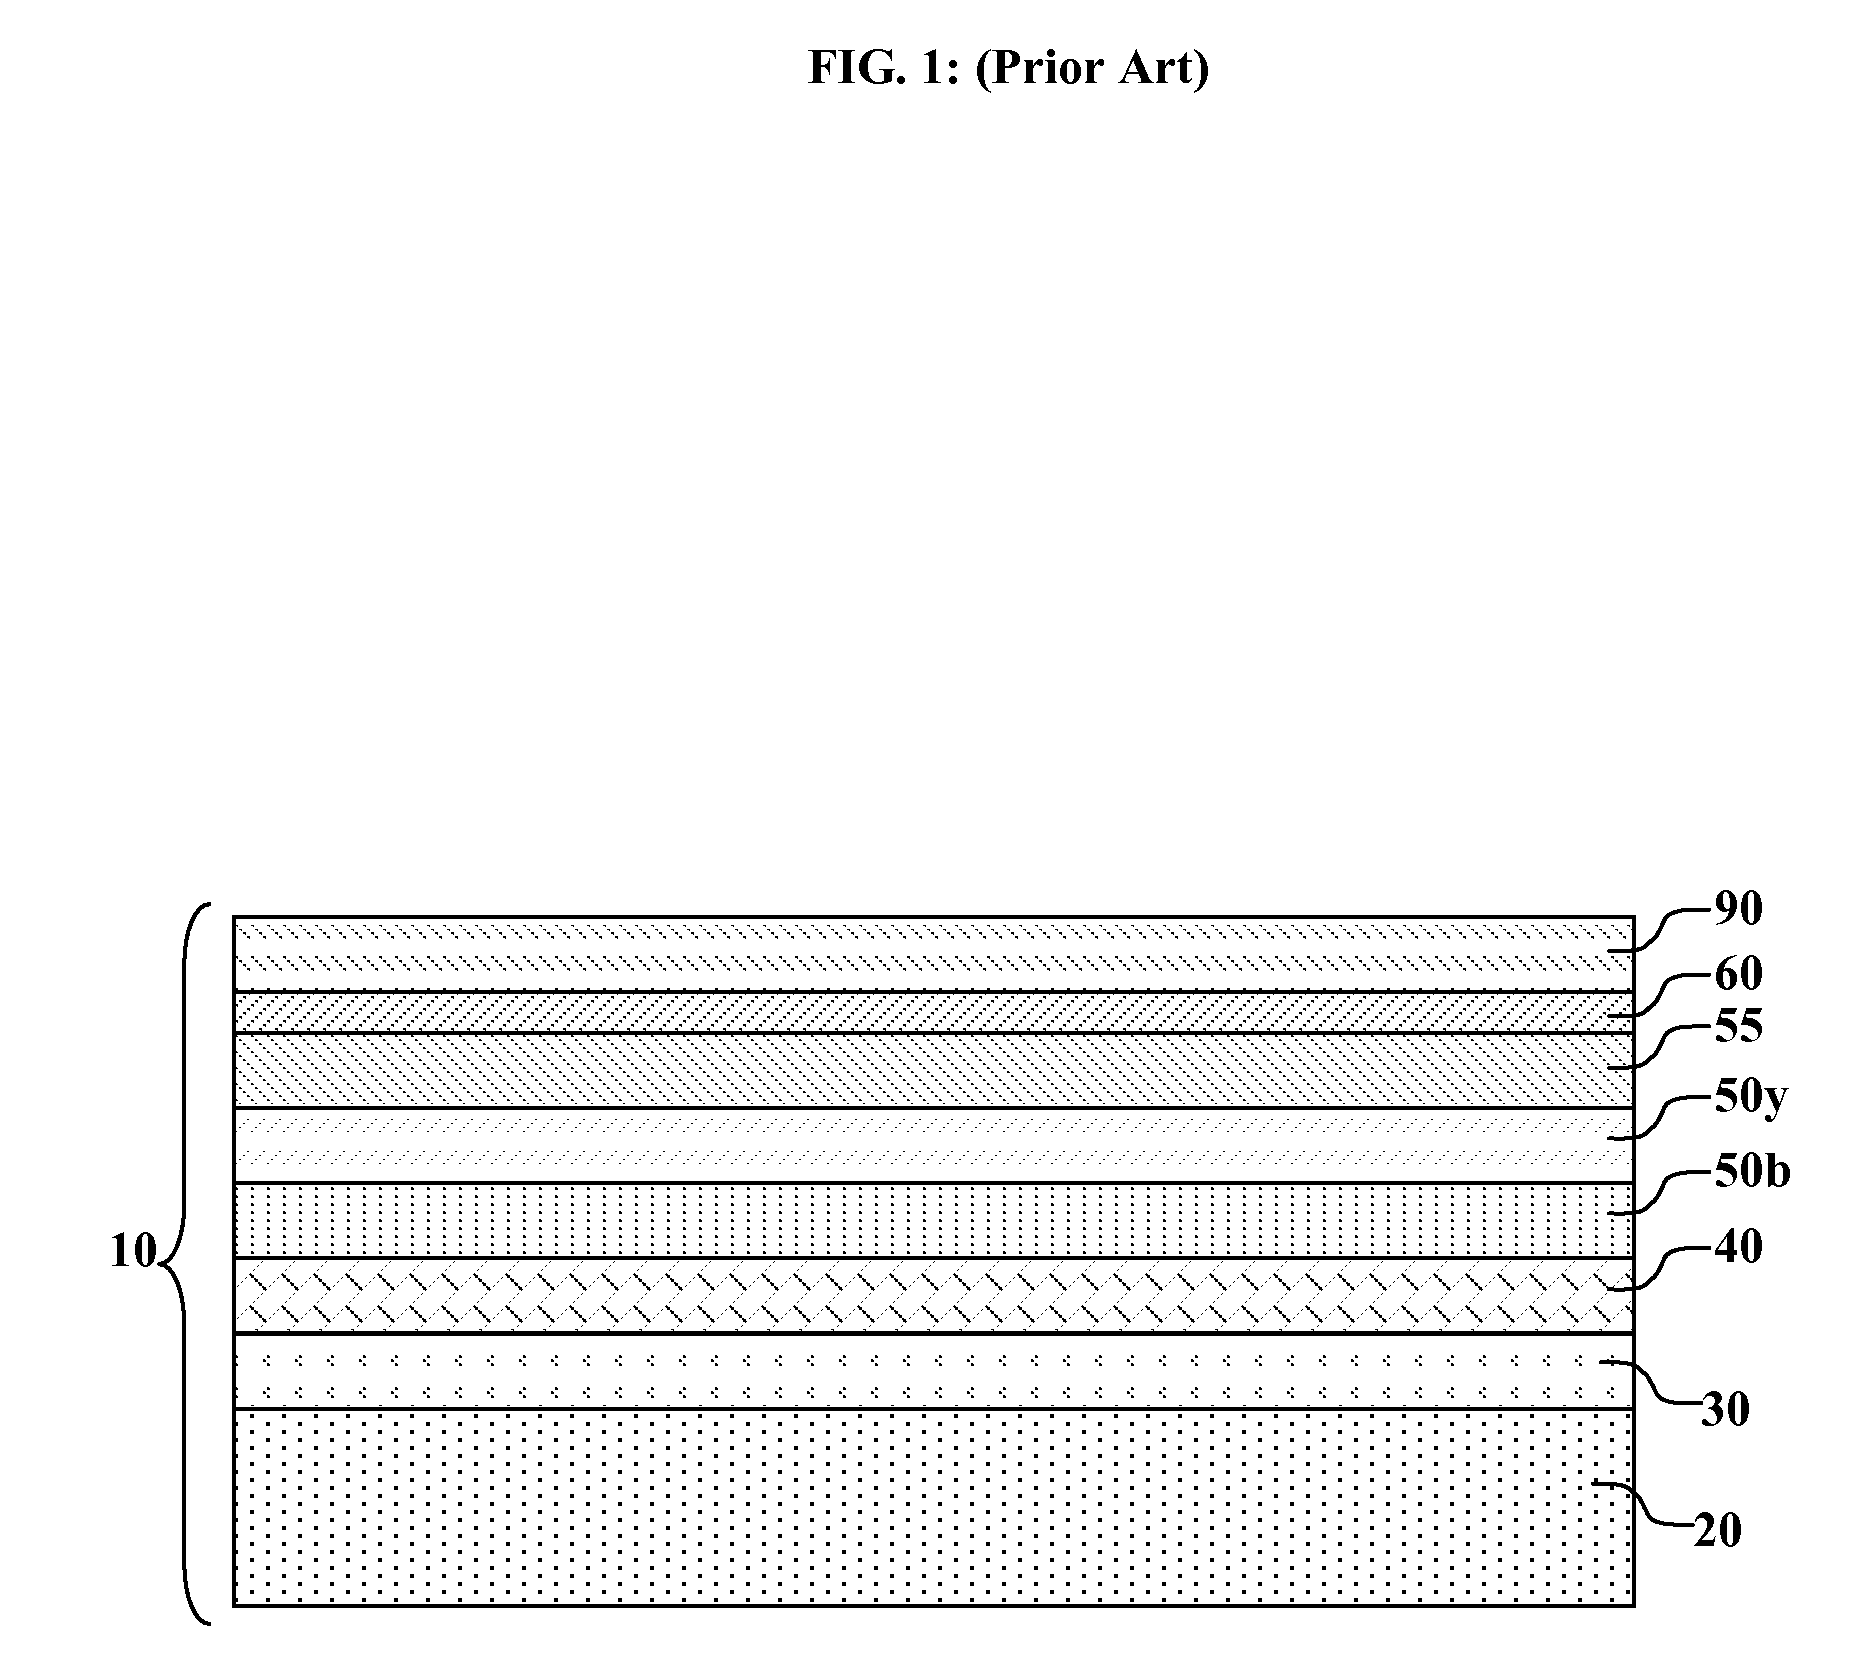 Inverted OLED device with improved efficiency